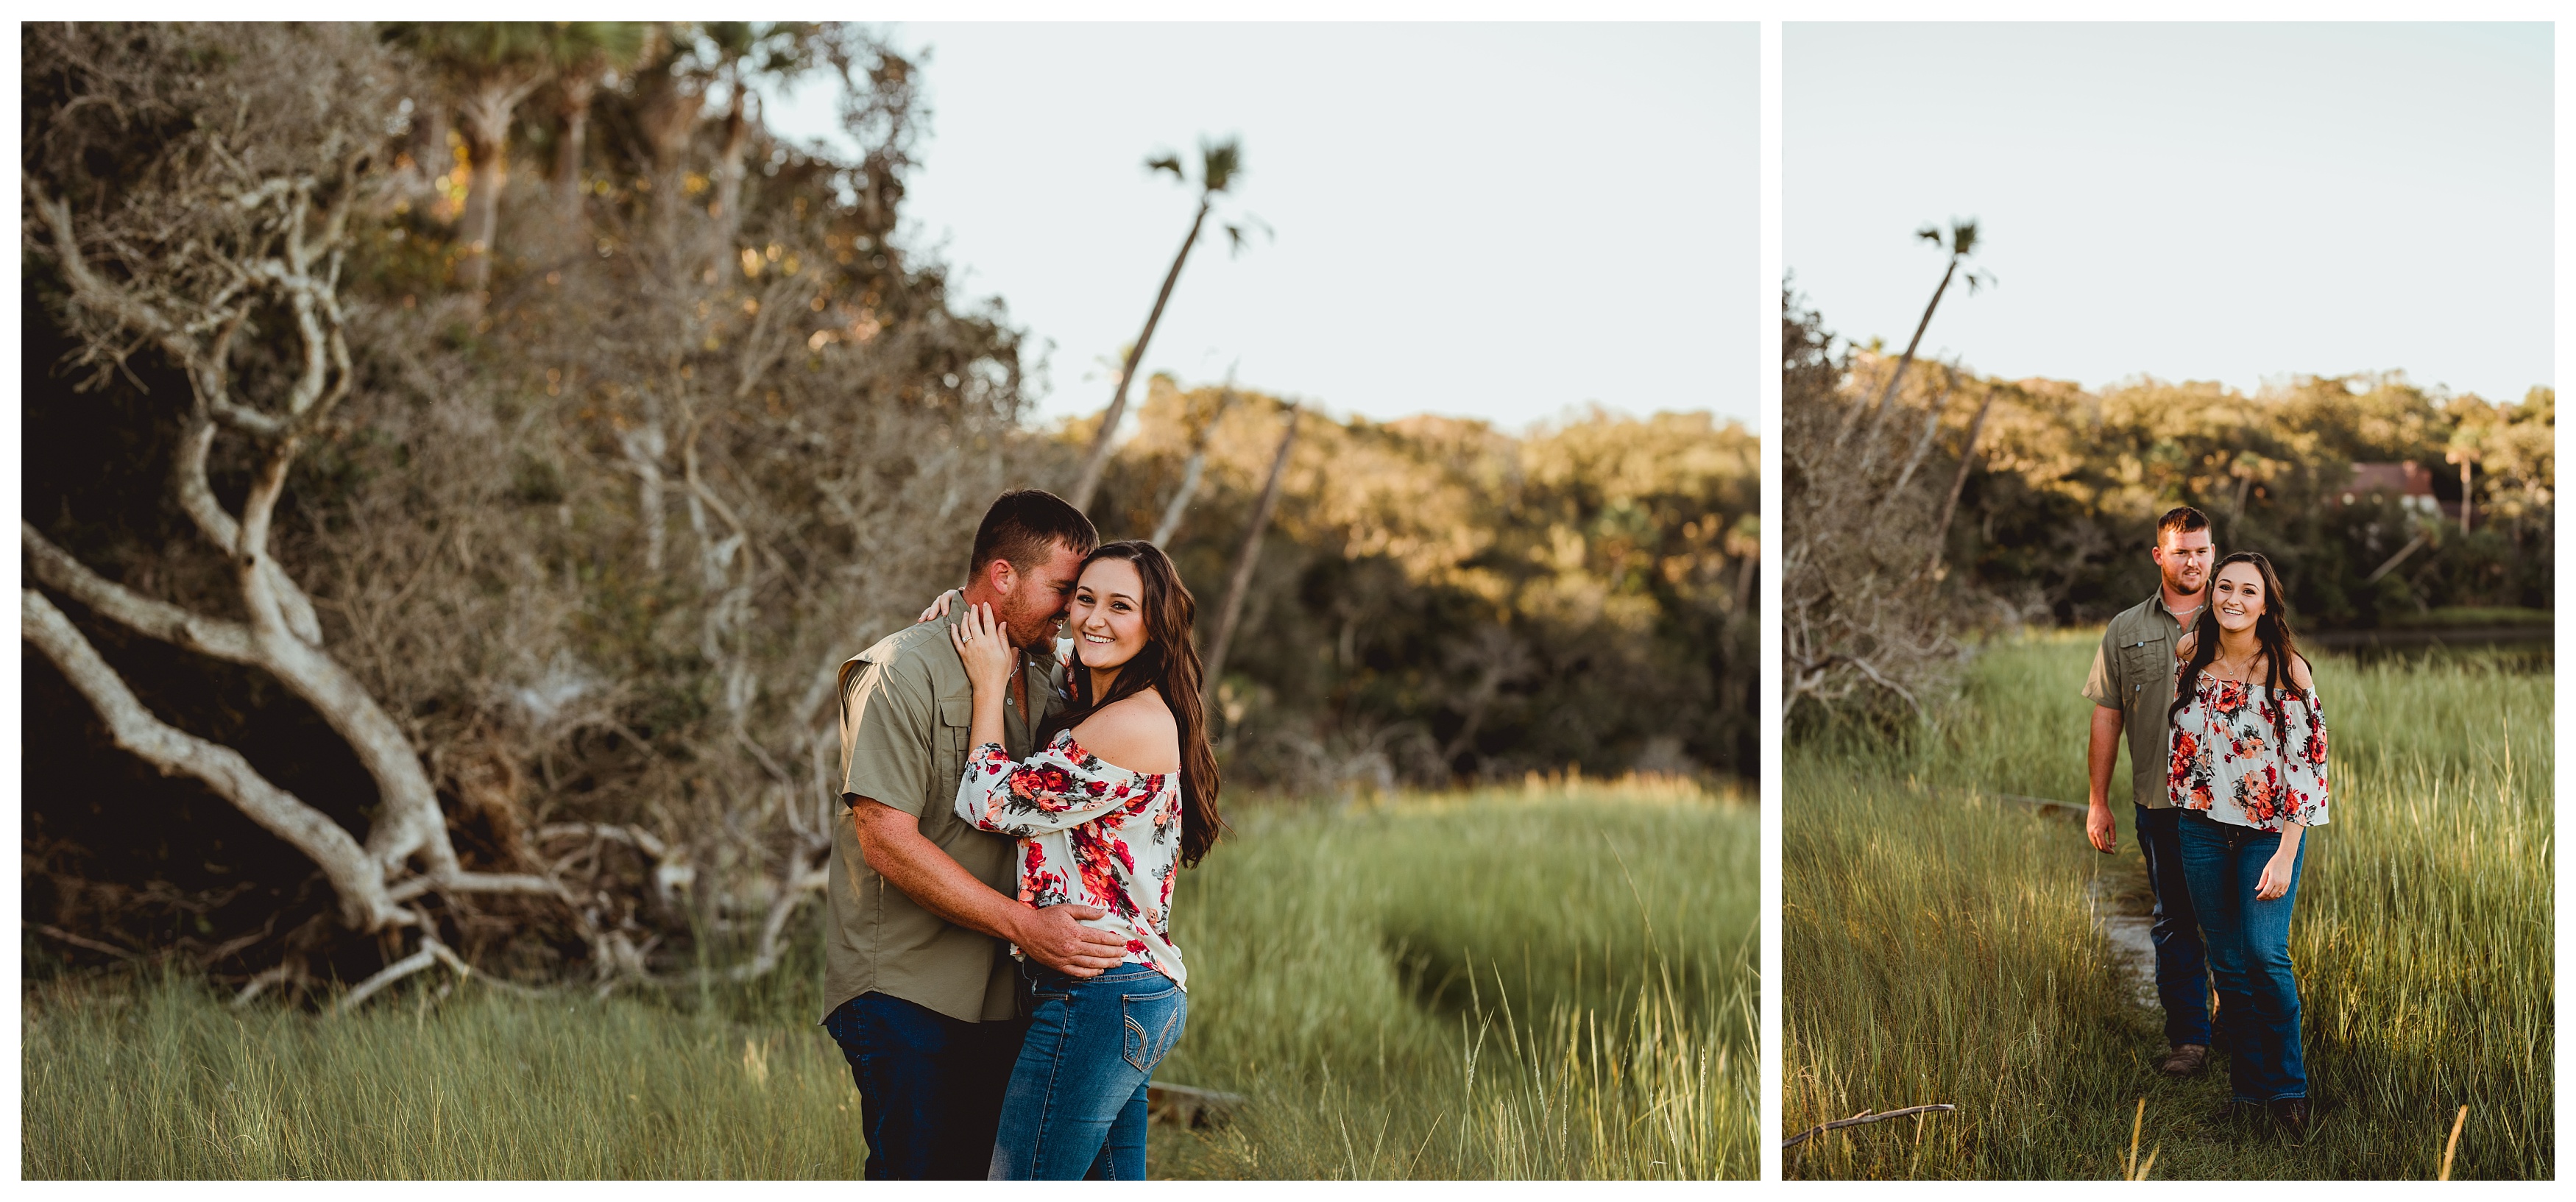 Intimate and candid couple photos in Jacksonville, FL. Shelly Williams Photography